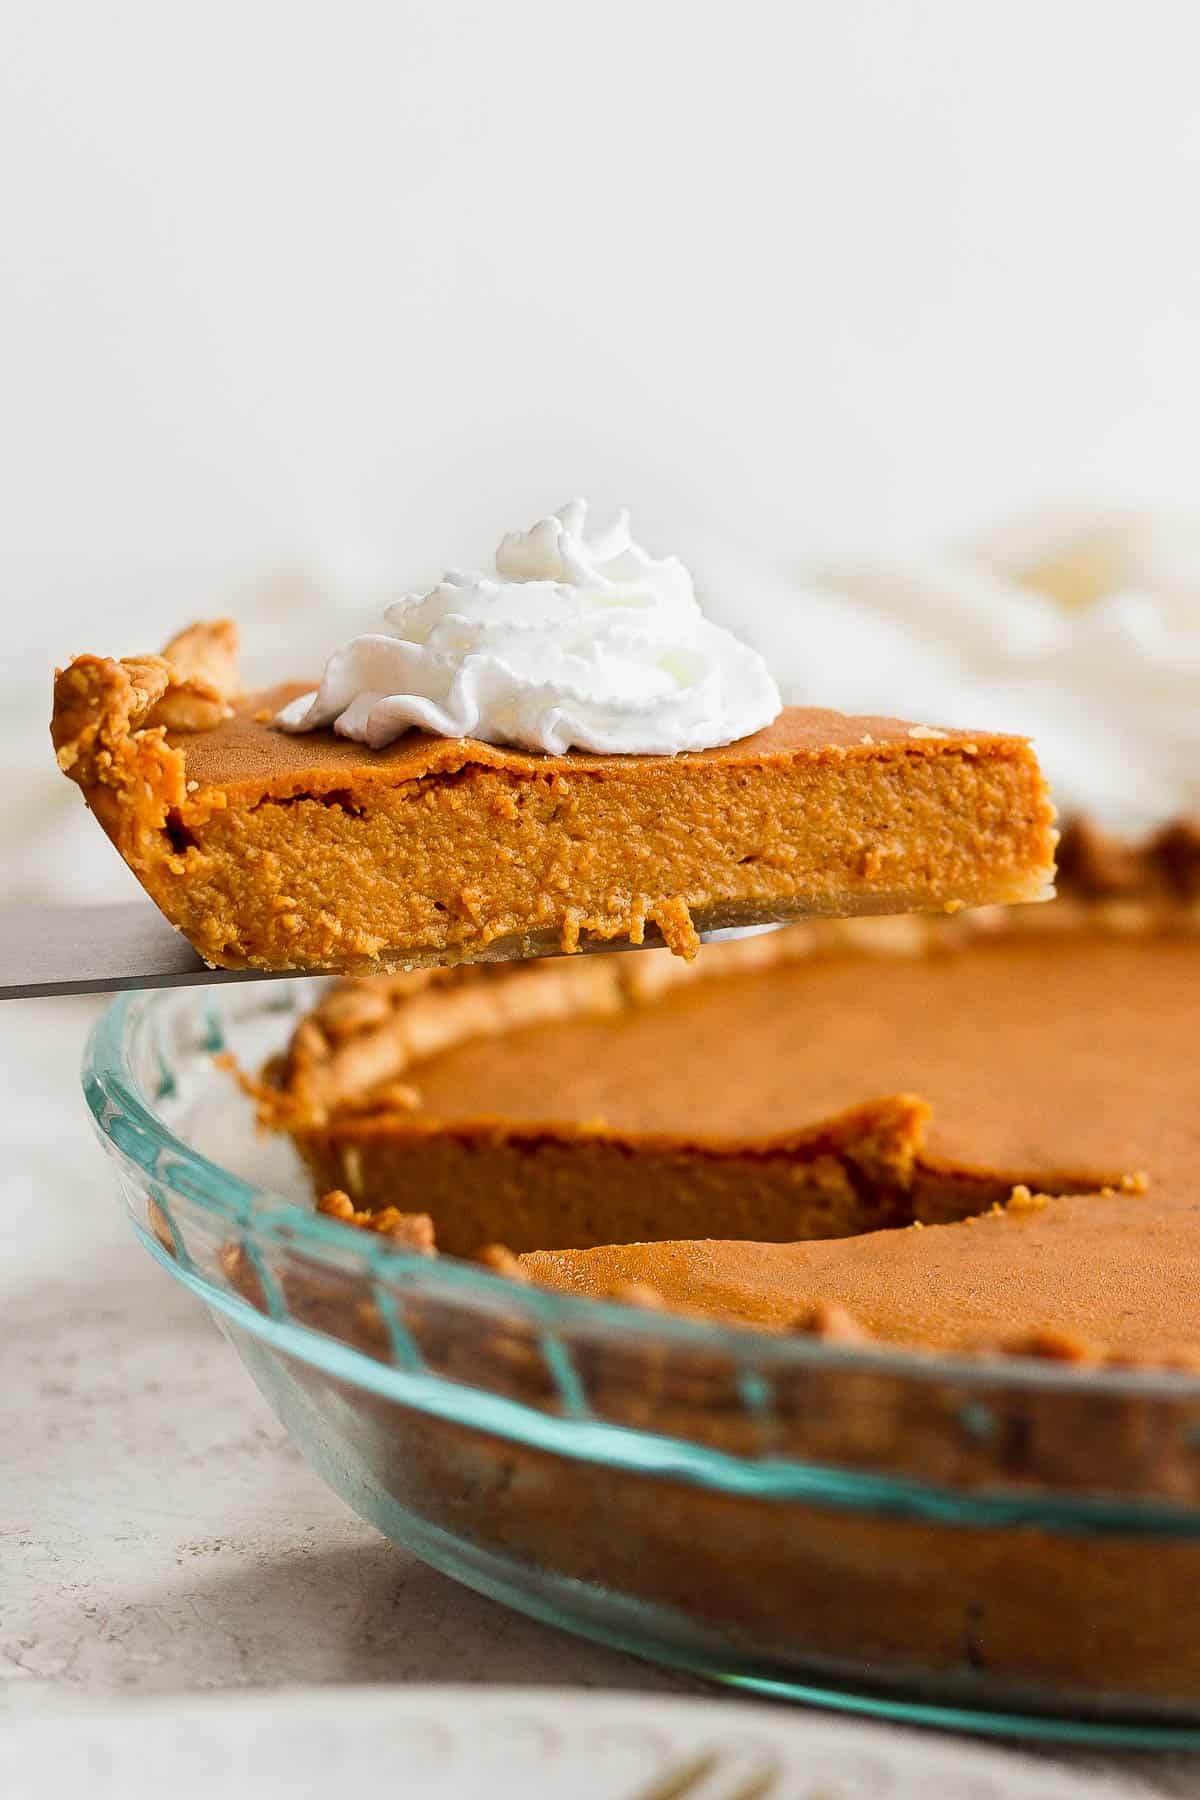 A pumpkin pie slice with a dollop of whip cream being lifted out of the pie pan with a serving utensil.